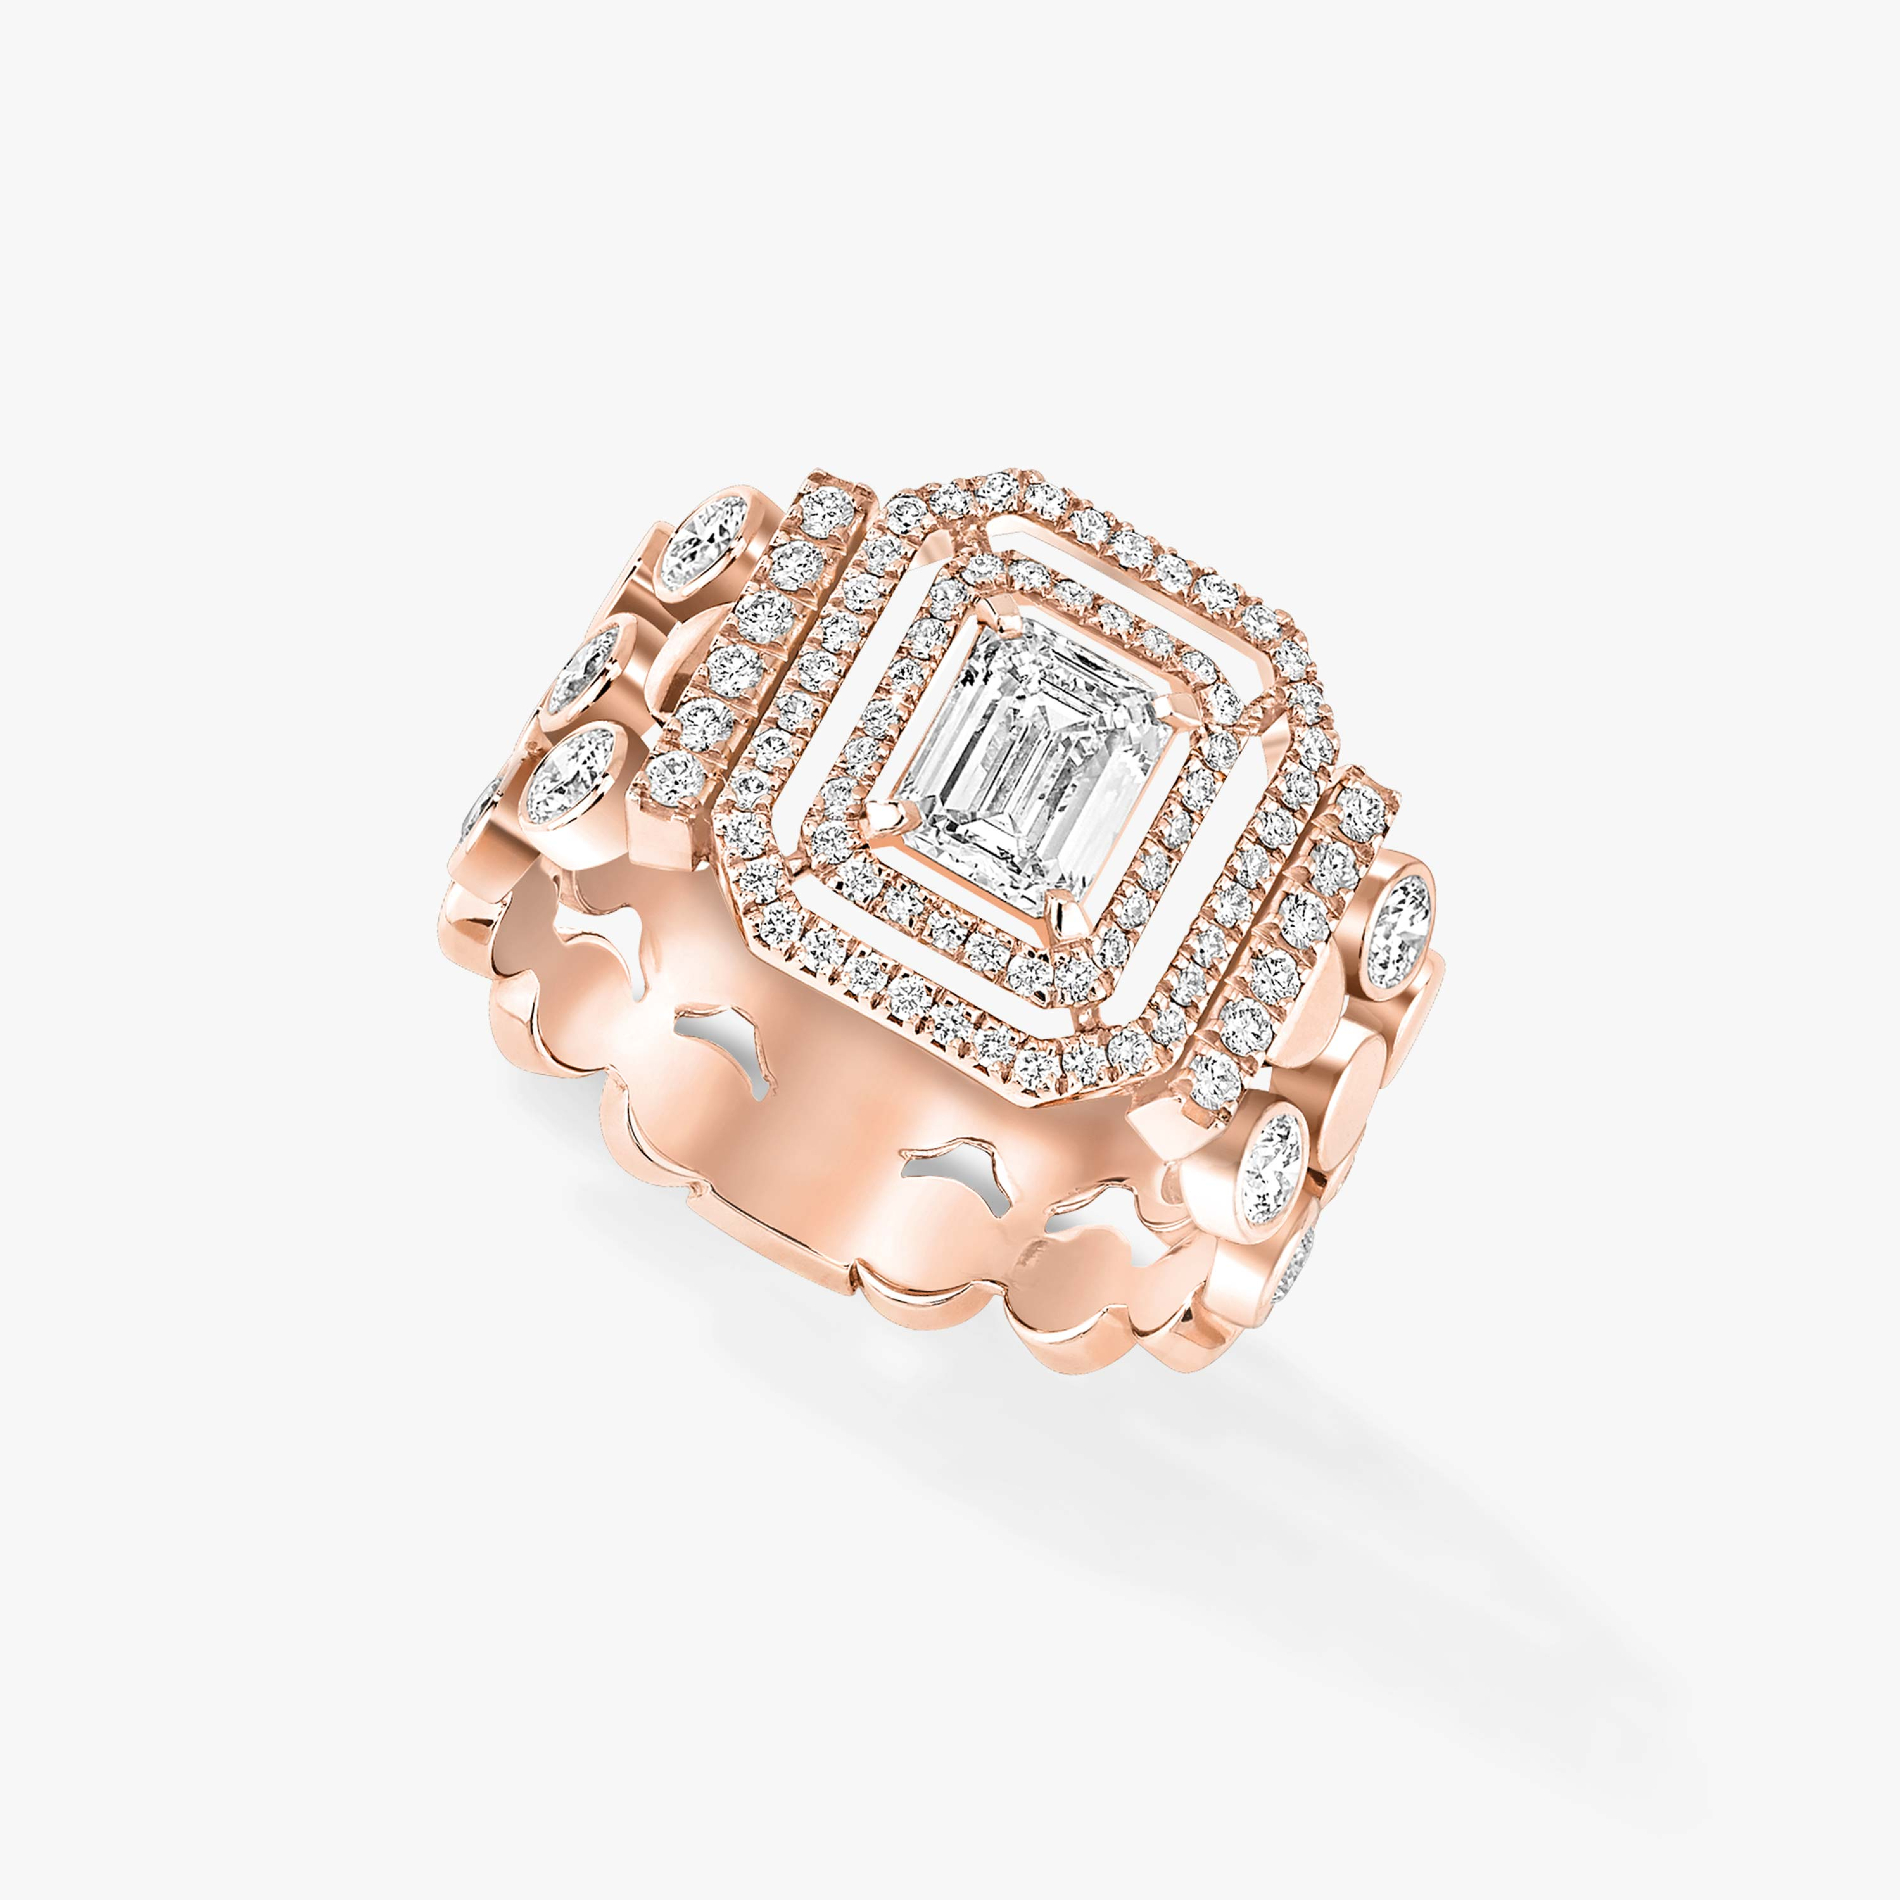 Ring For Her Pink Gold Diamond D-Vibes Multi-Row Ring 12445-PG